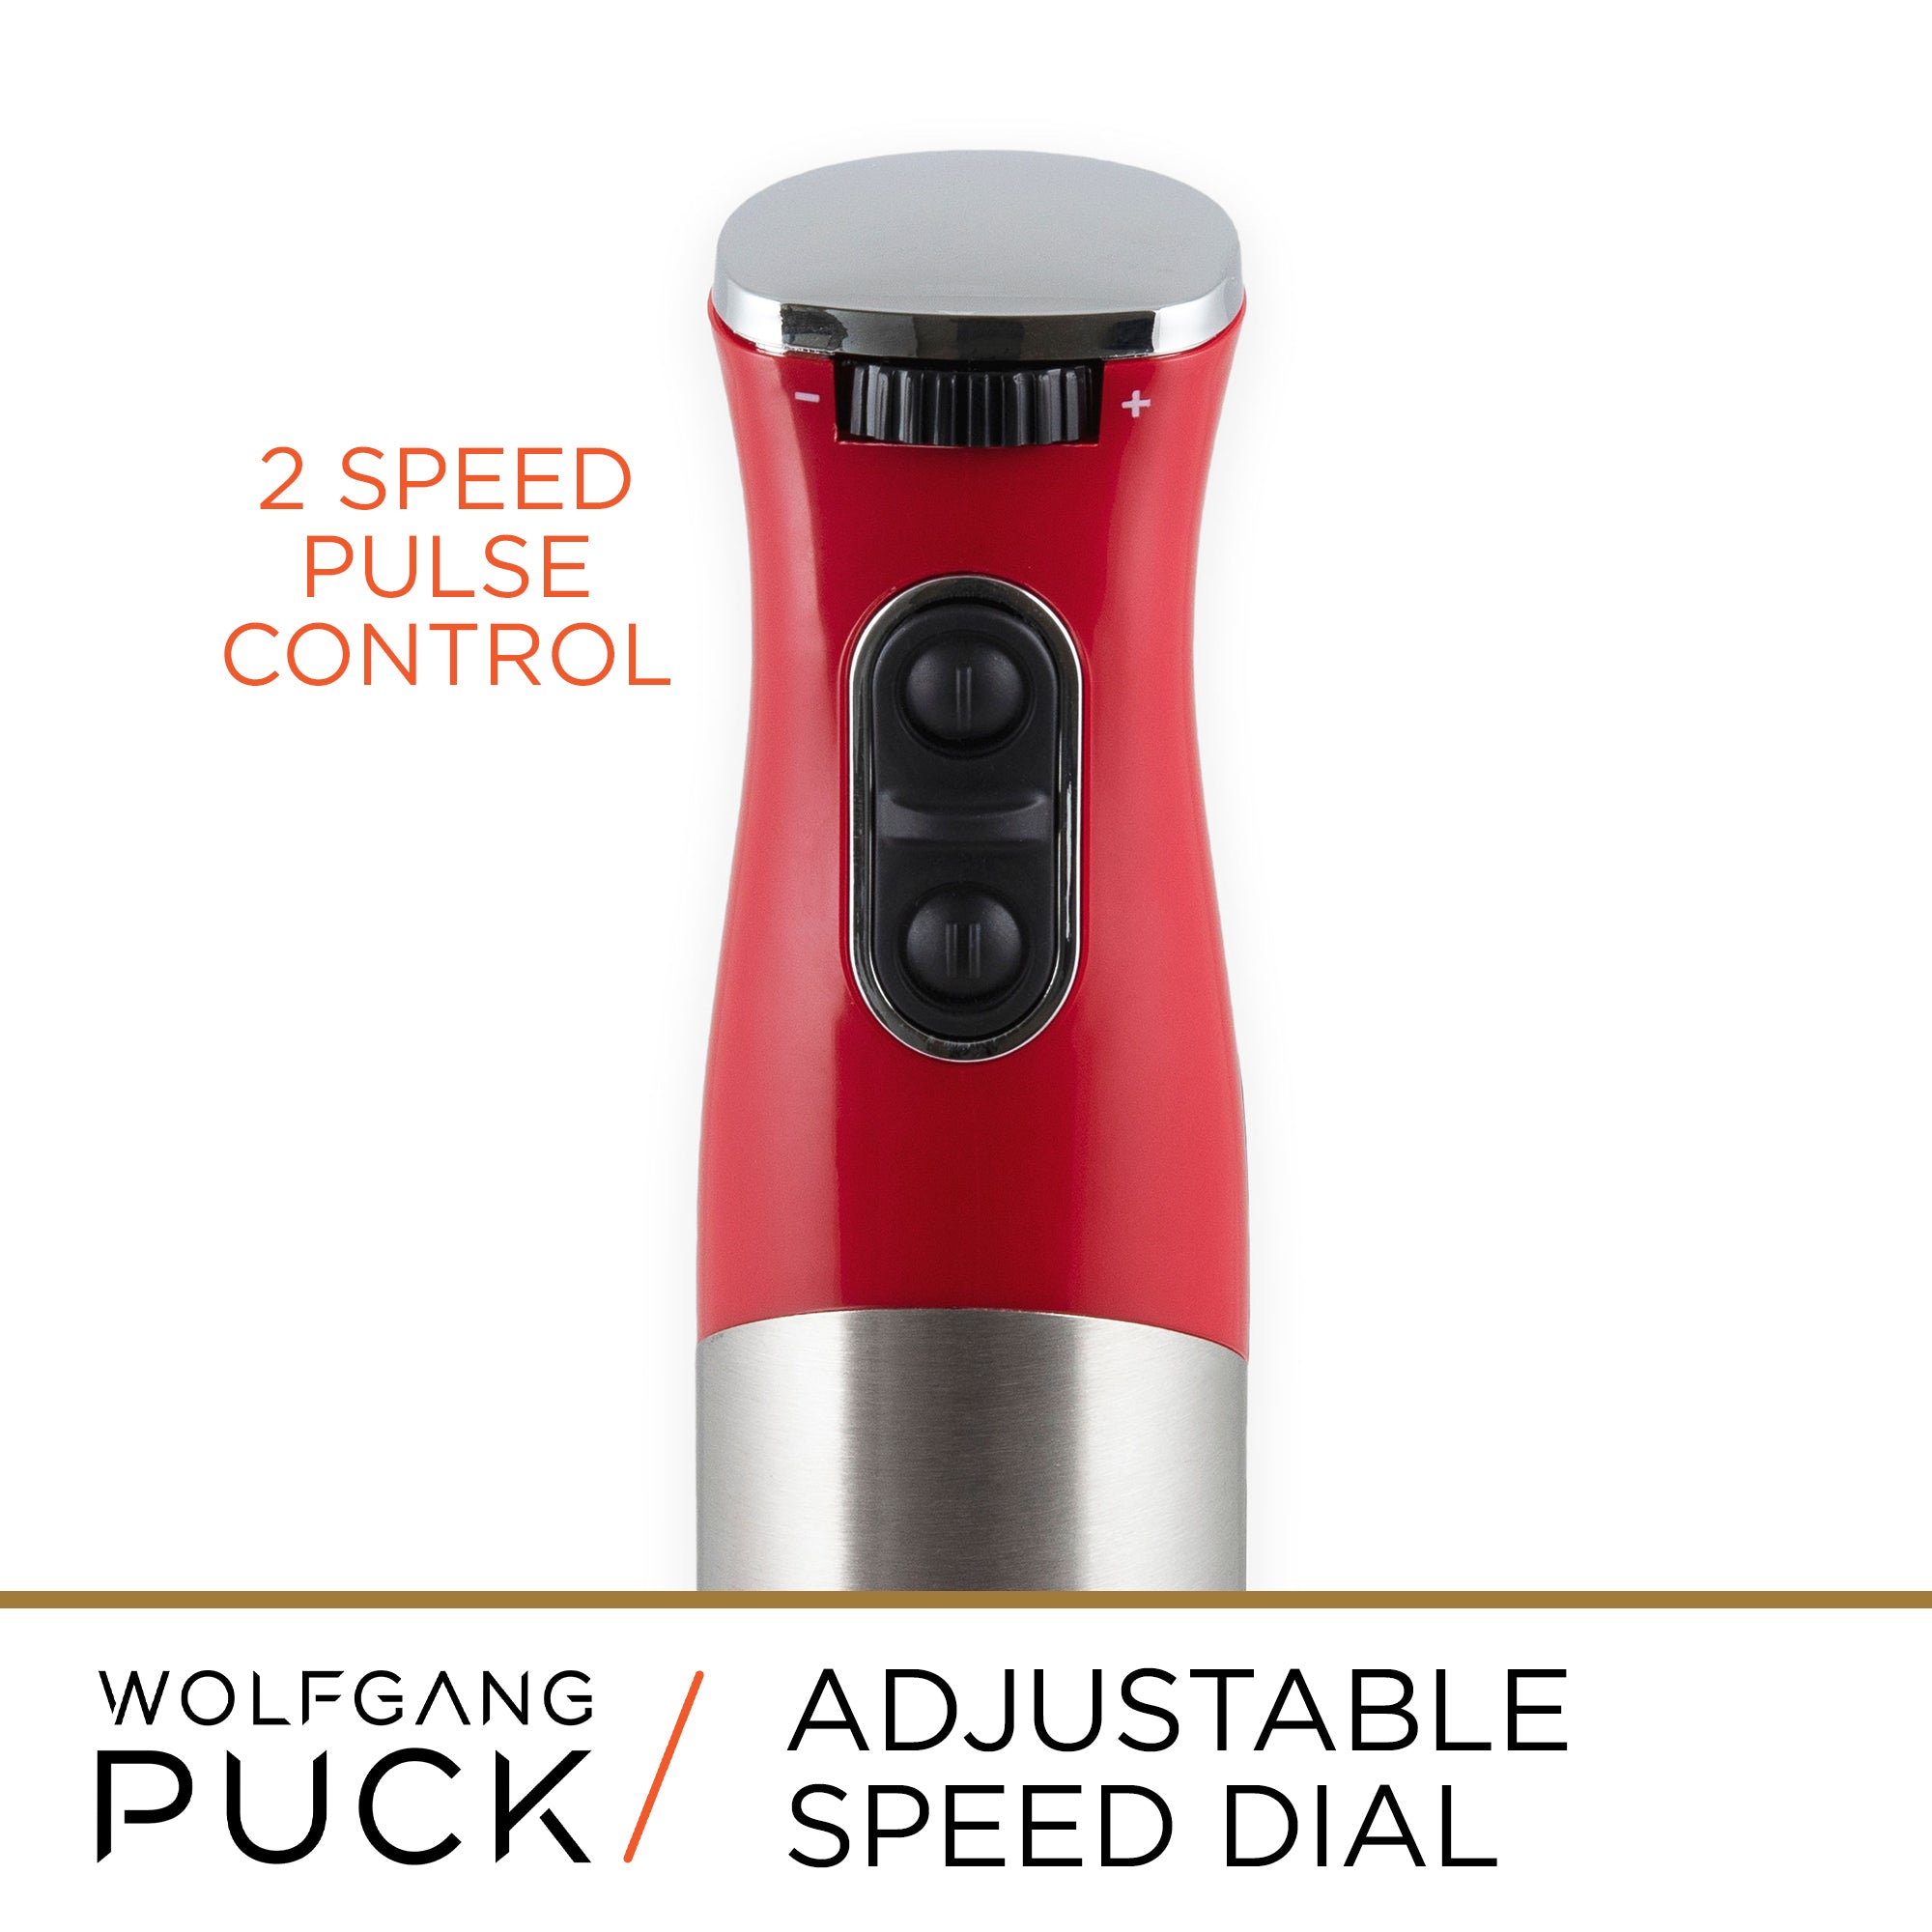 Immersion blender in red by Wolfgang Puck